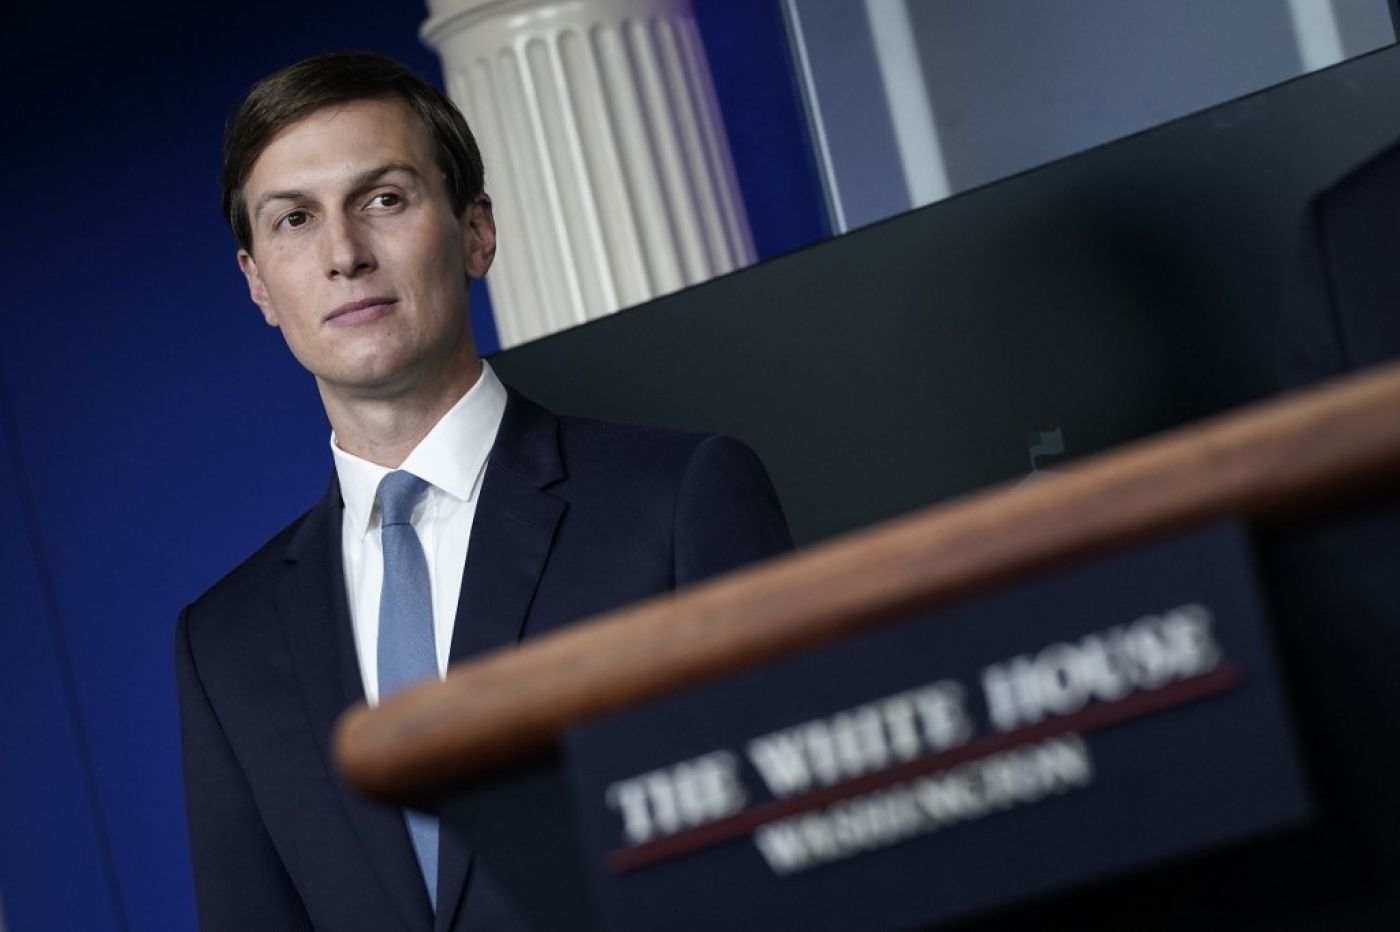 Jared Kushner resigned from his family's real estate business in 2016 after joining the White House